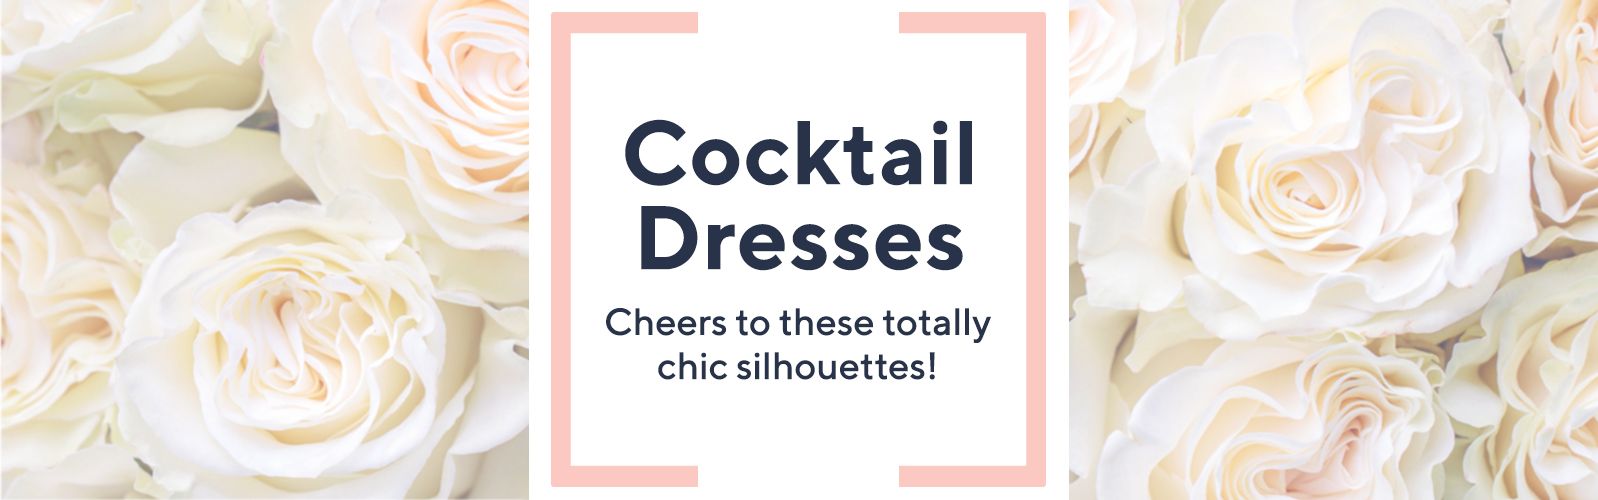 Cocktail Dresses Cheers to these totally chic silhouettes!